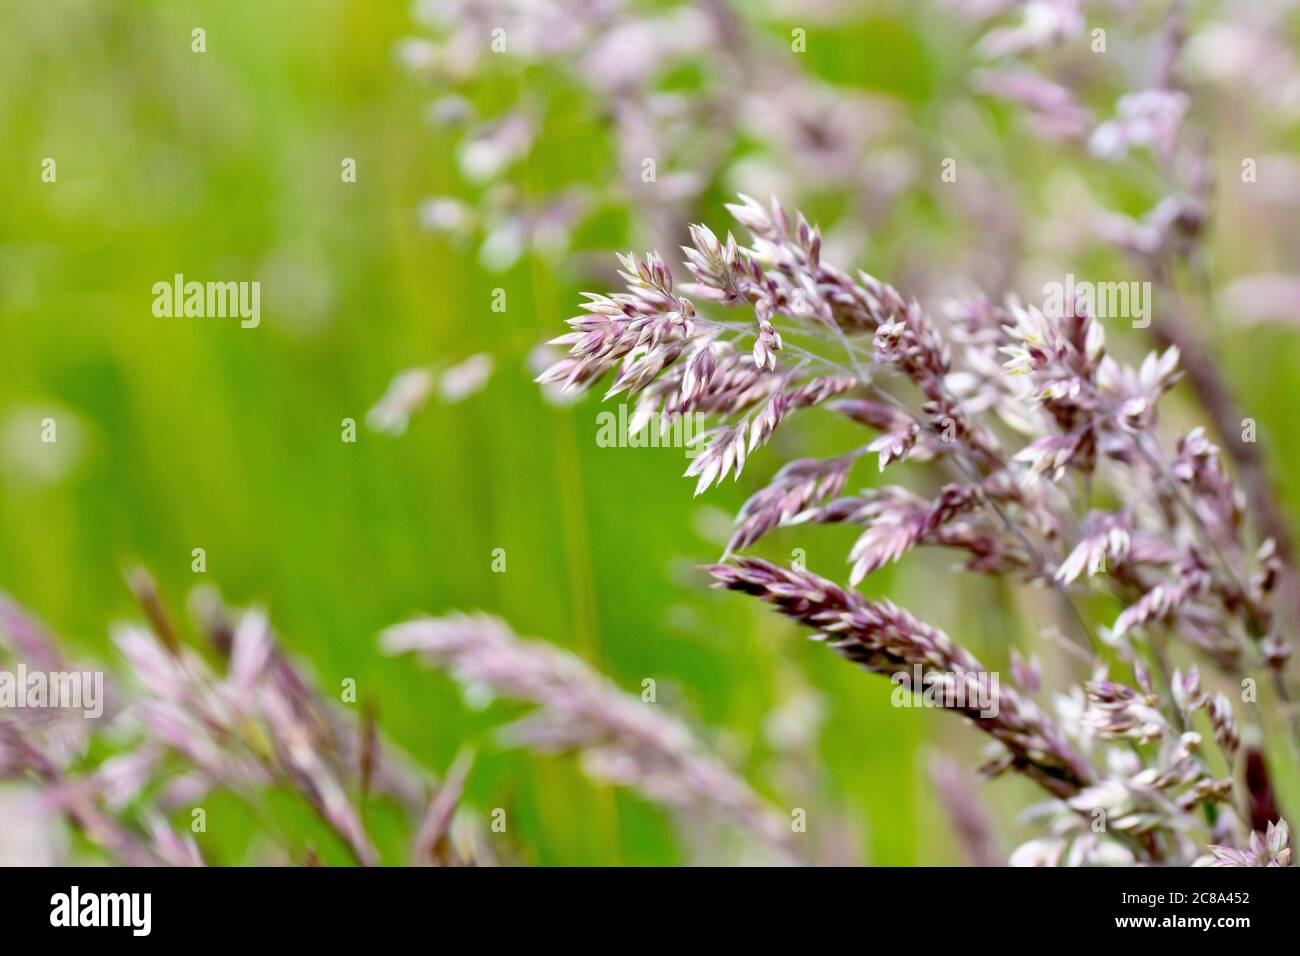 Yorkshire Fog (holcus lanatus), close up of the grass as it begins to flower, with shallow depth of field. Stock Photo